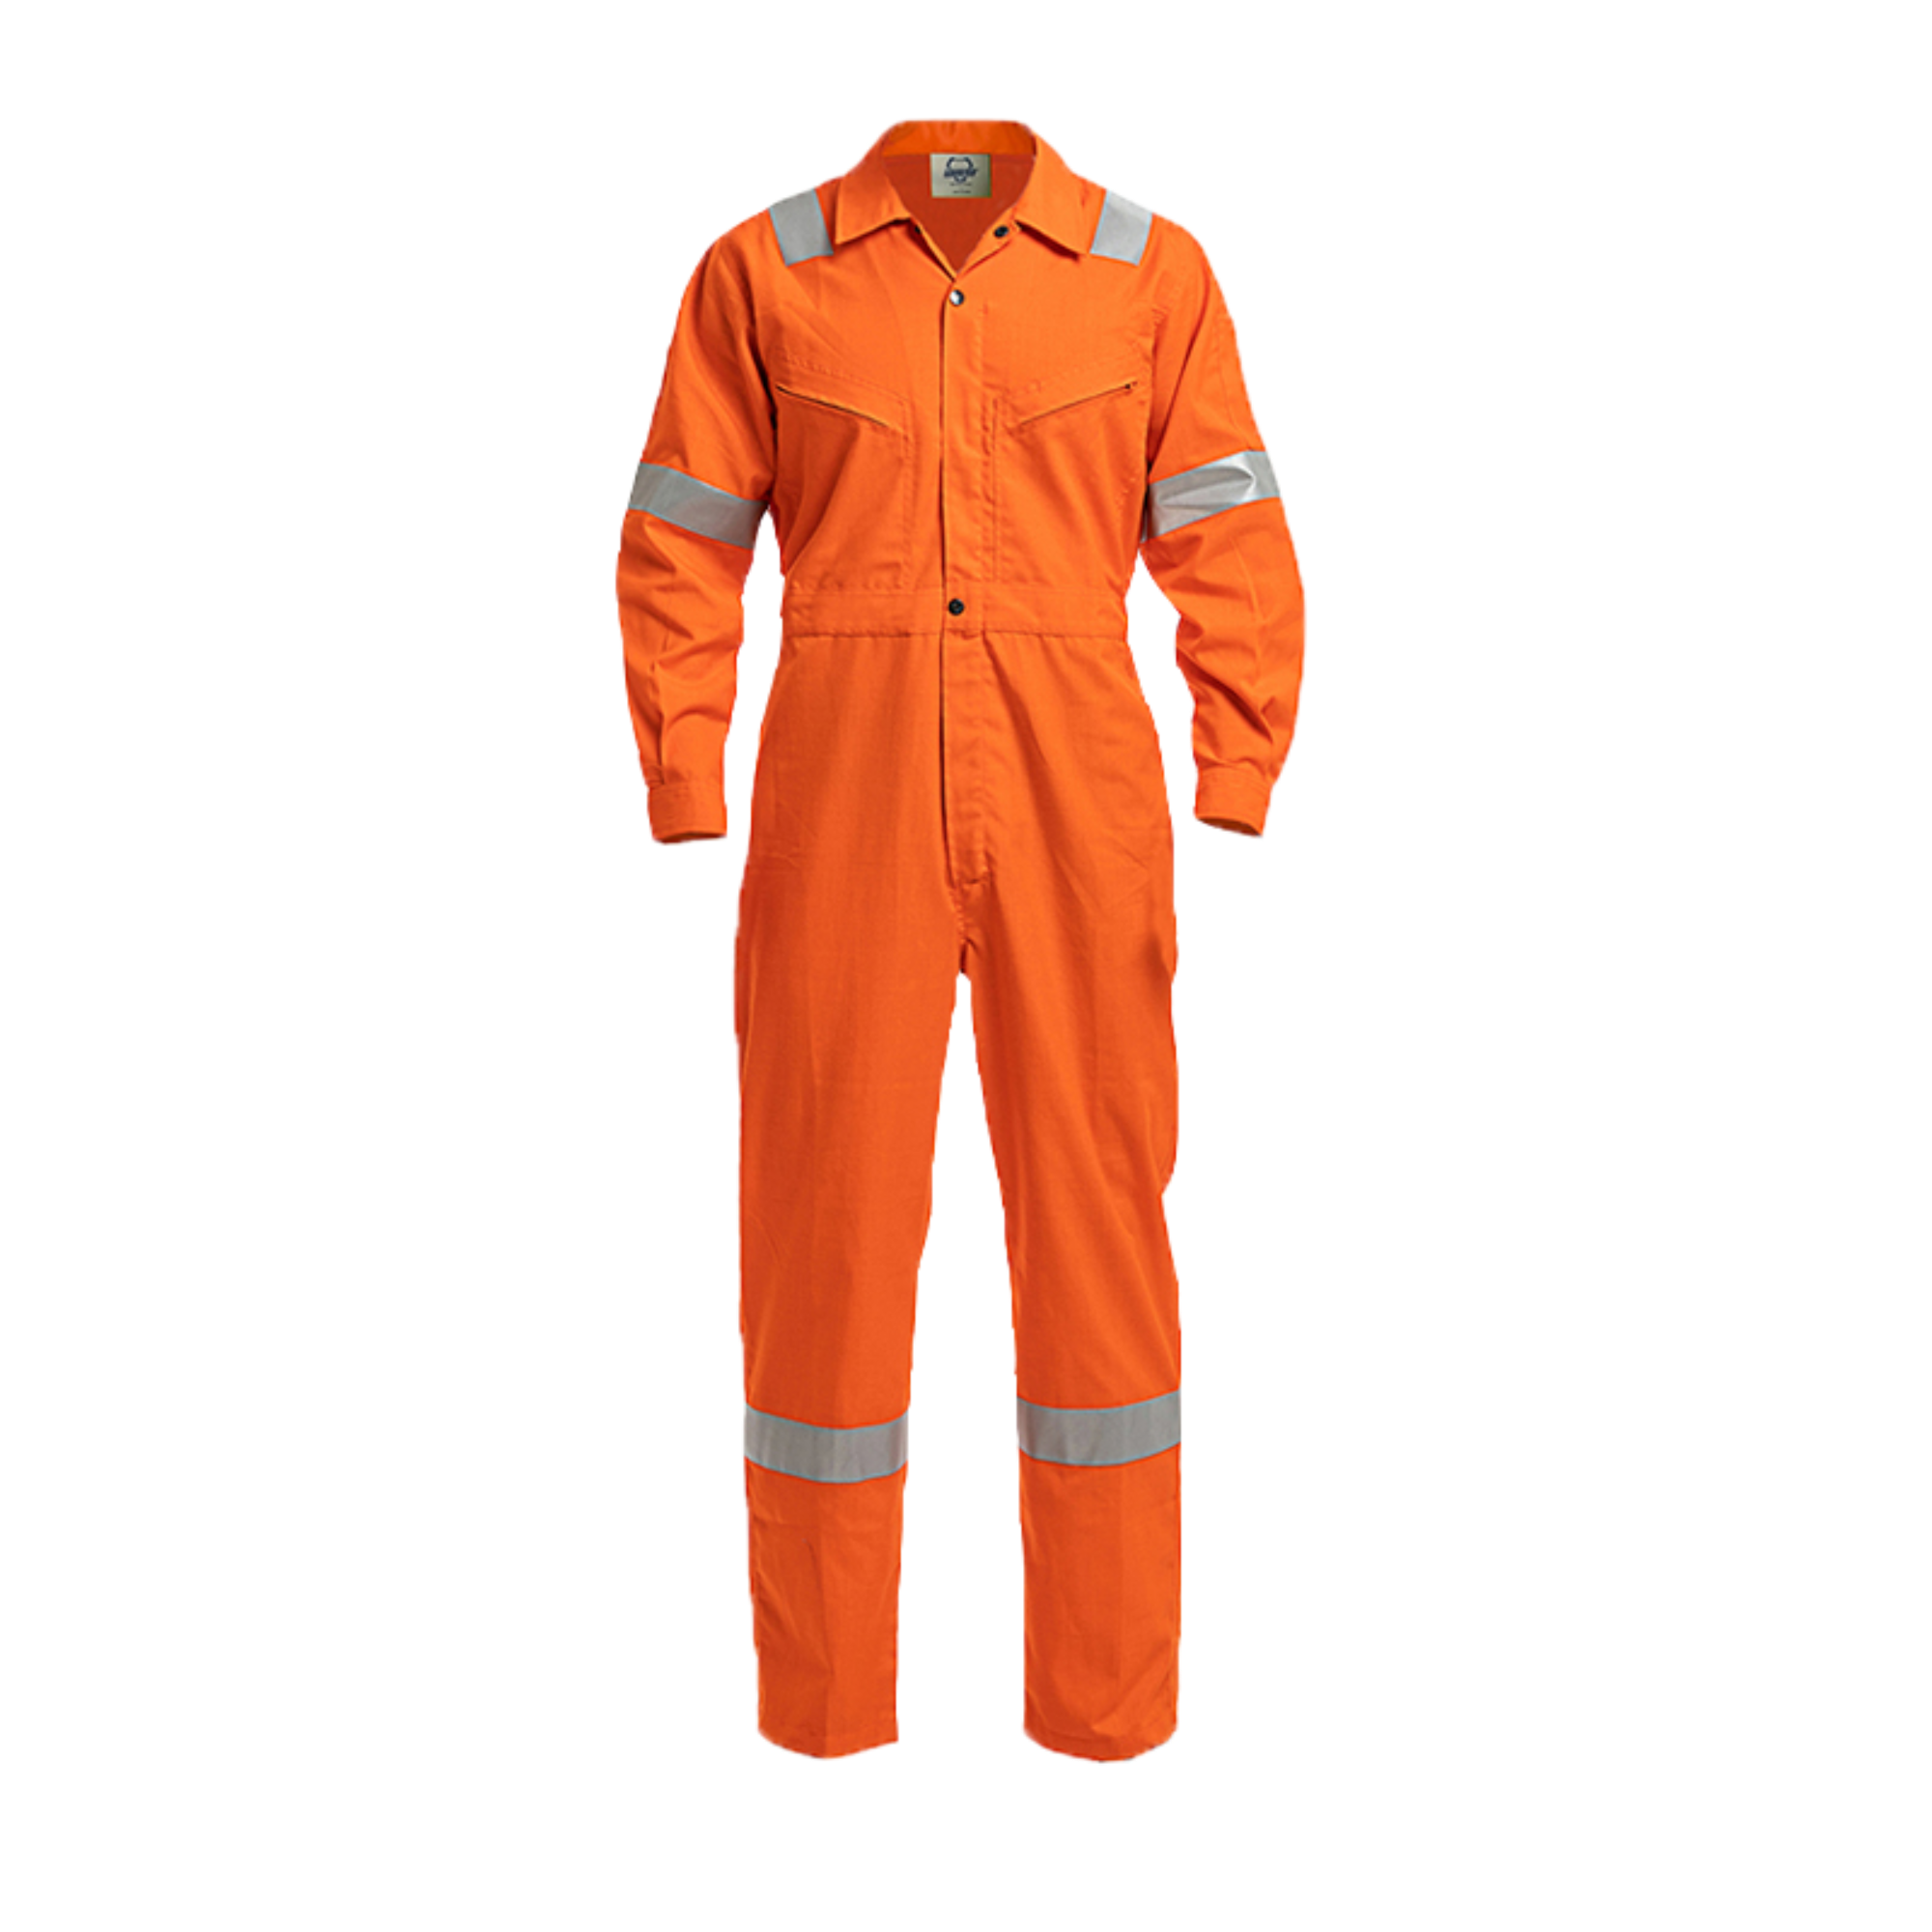 Flame resistant coveralls: essential gear for workers in hazardous environments